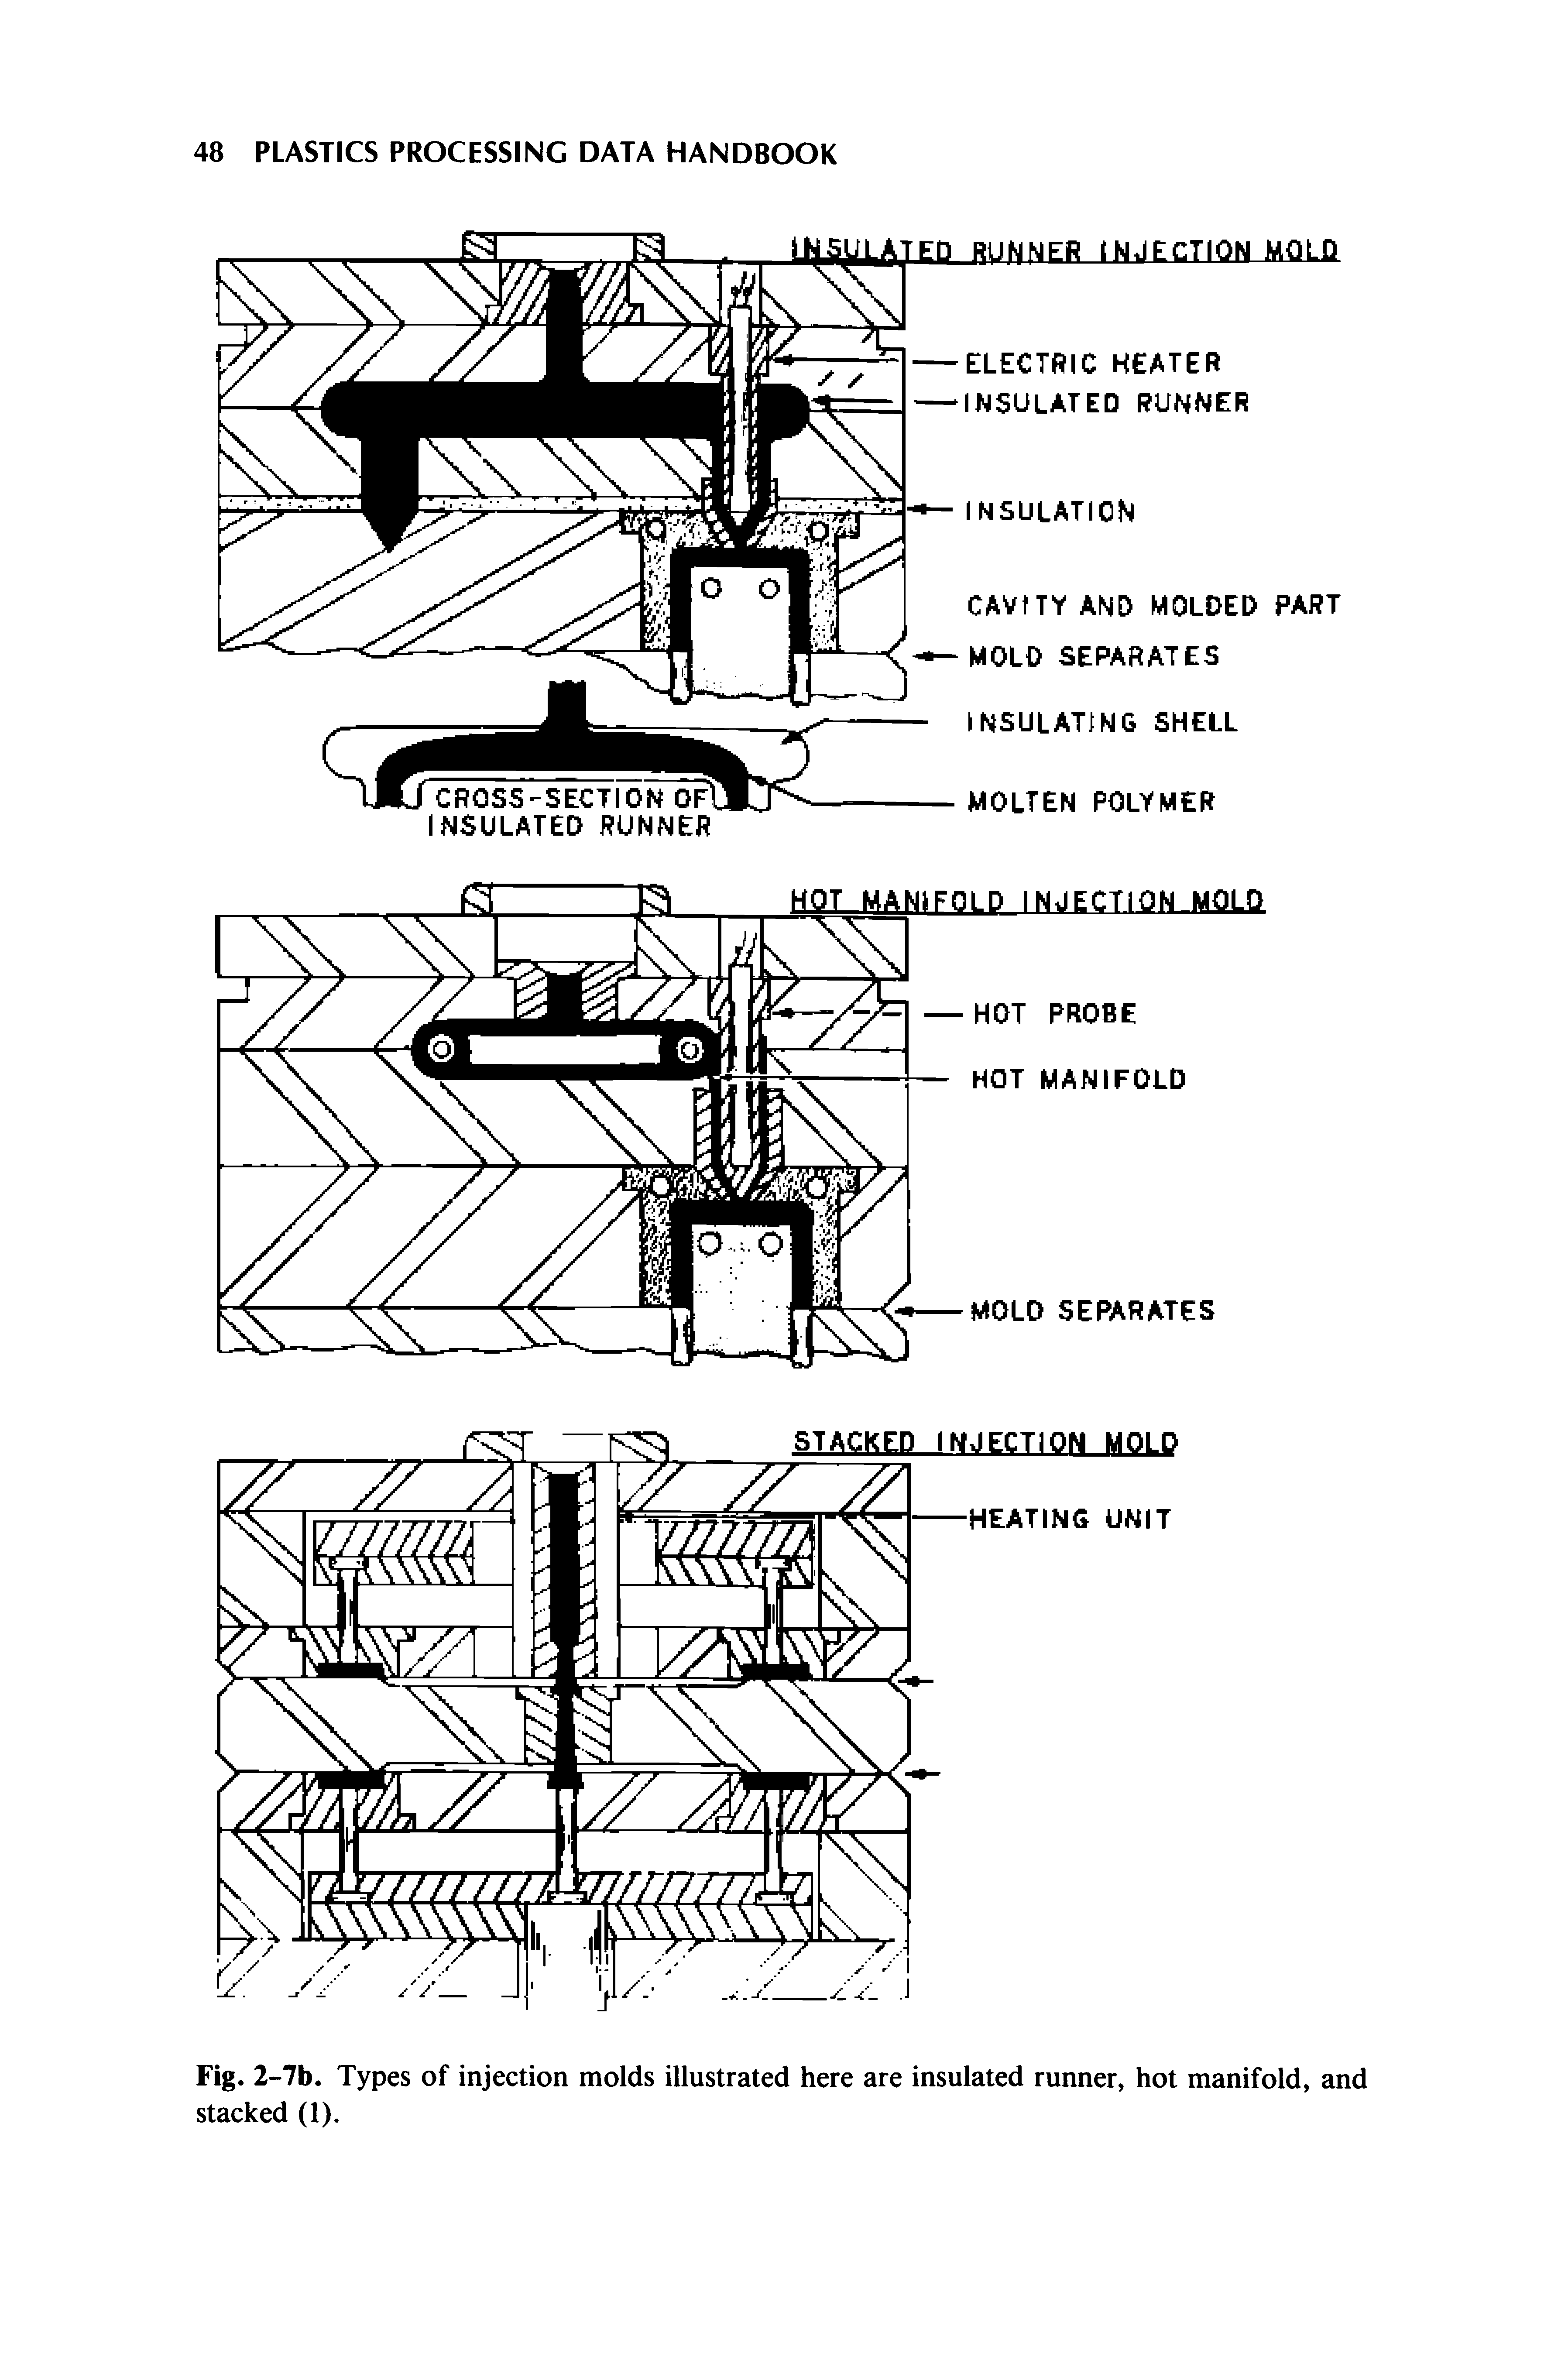 Fig. 2-7b. Types of injection molds illustrated here are insulated runner, hot manifold, and stacked (1).